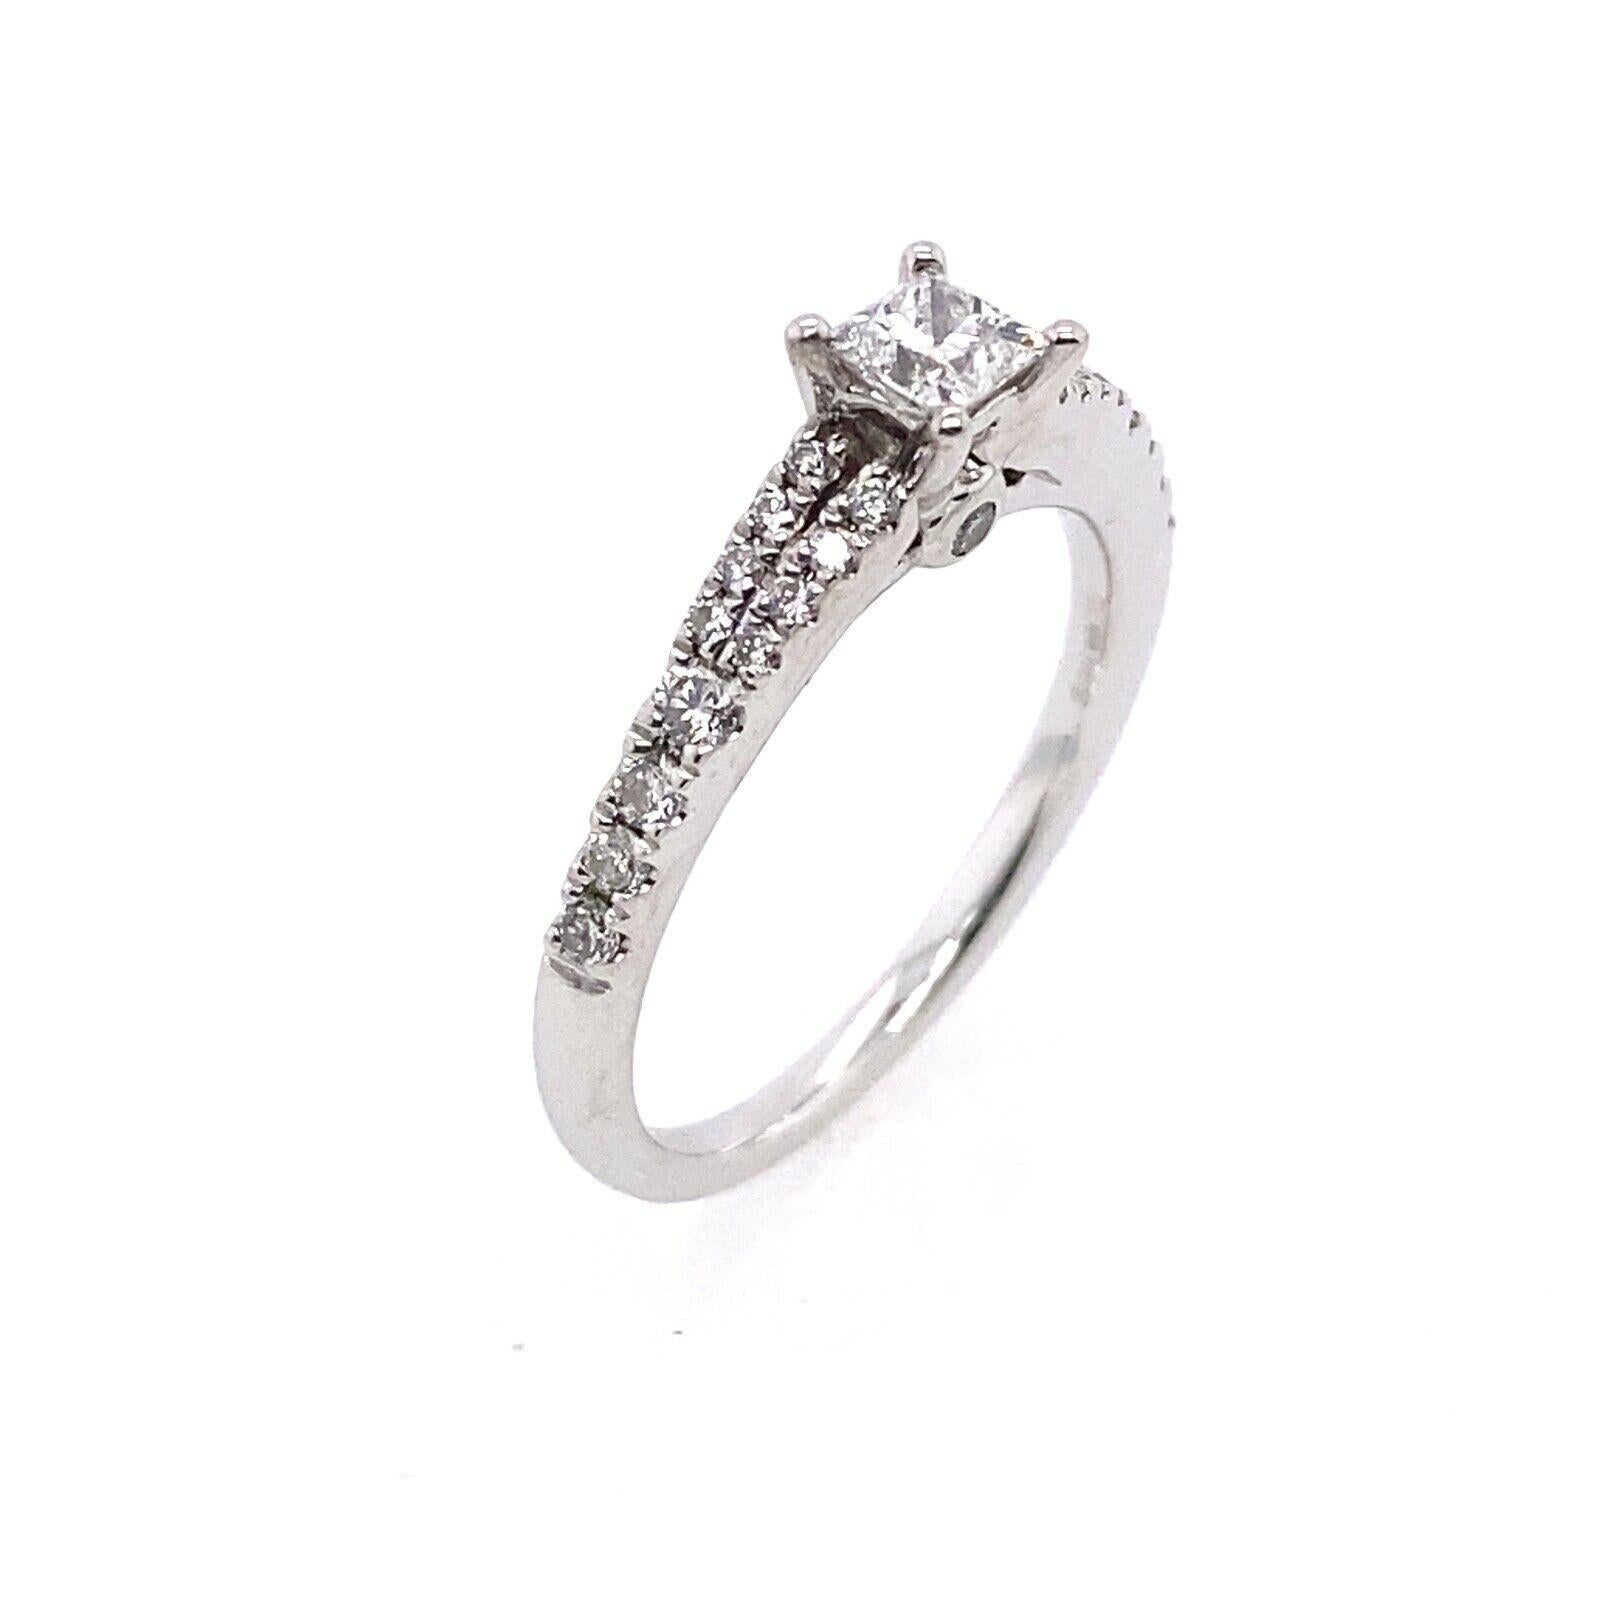 Tolkowsky Princess Cut 0.26ct Diamond Set In 18ct White Gold

This simple and elegant ring set with 0.26ct princess diamond with 13 round diamonds on each shoulder set in 18ct white gold, with split shank Tolkowsky Box

Additional Information: